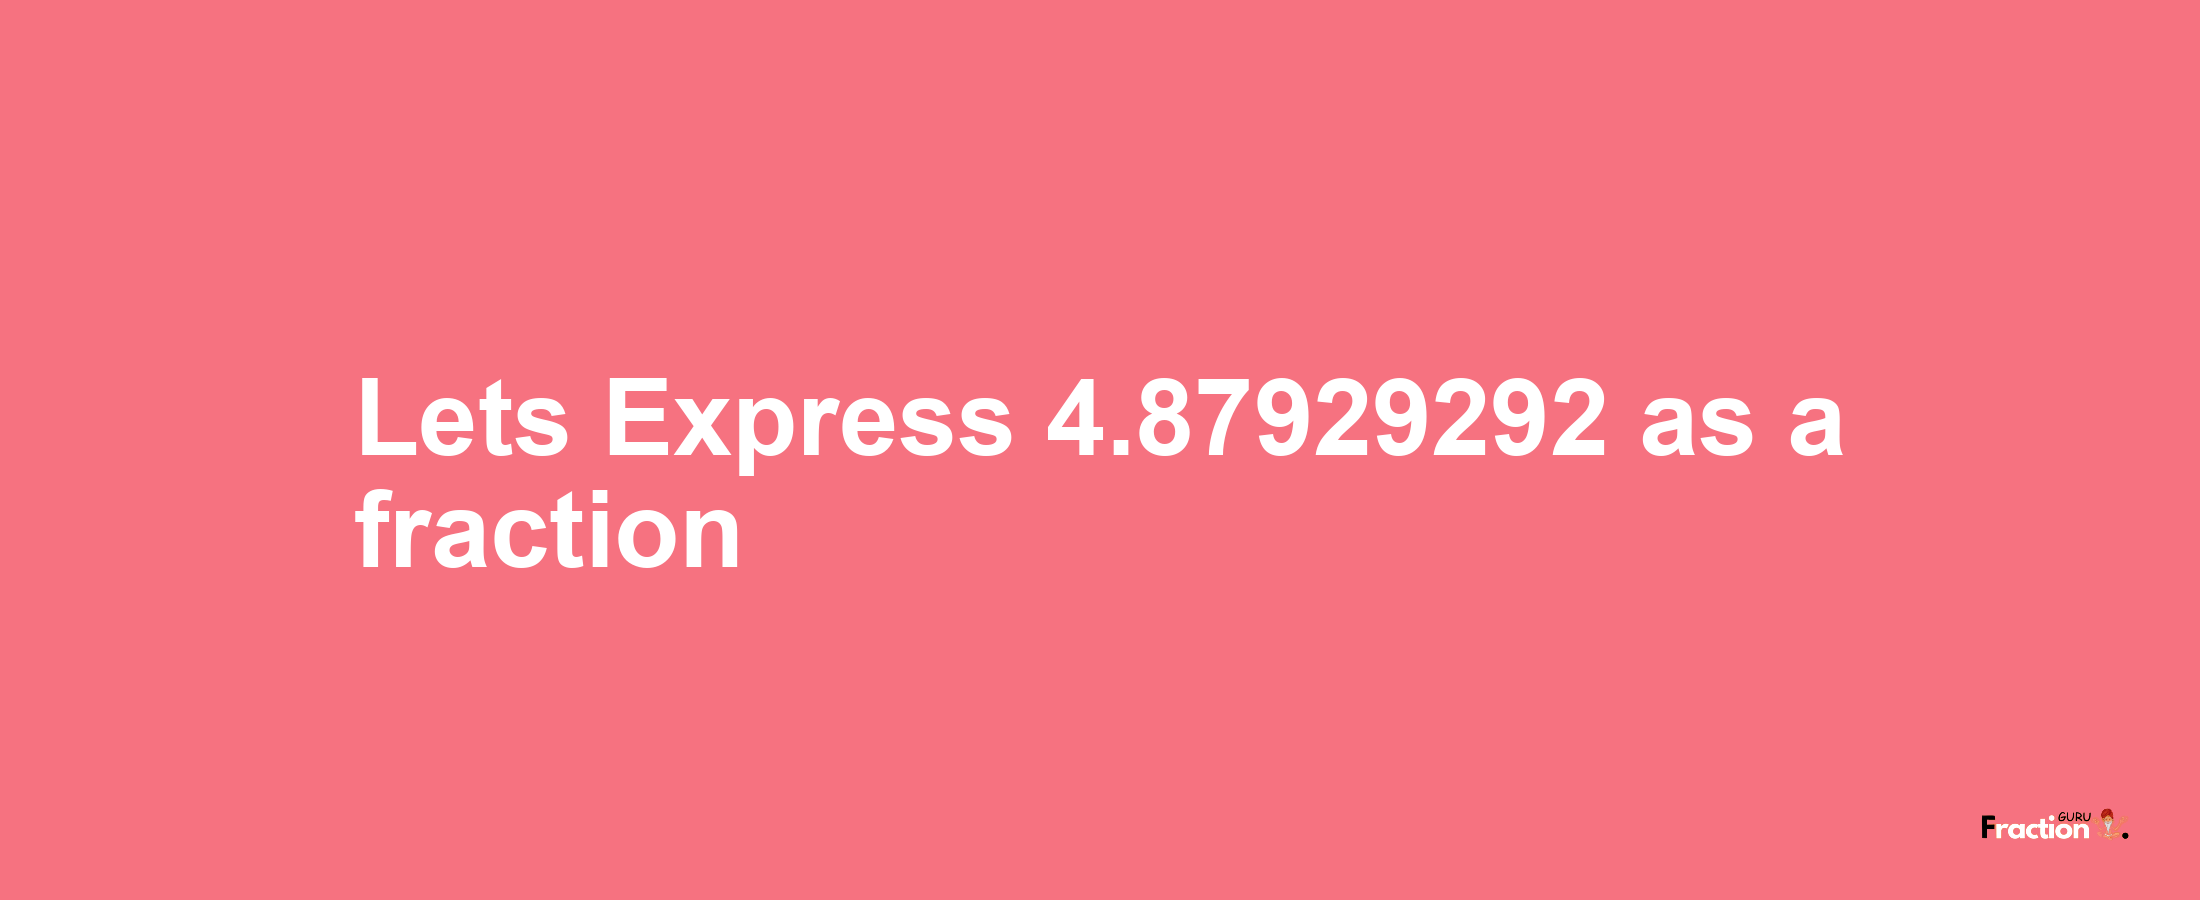 Lets Express 4.87929292 as afraction